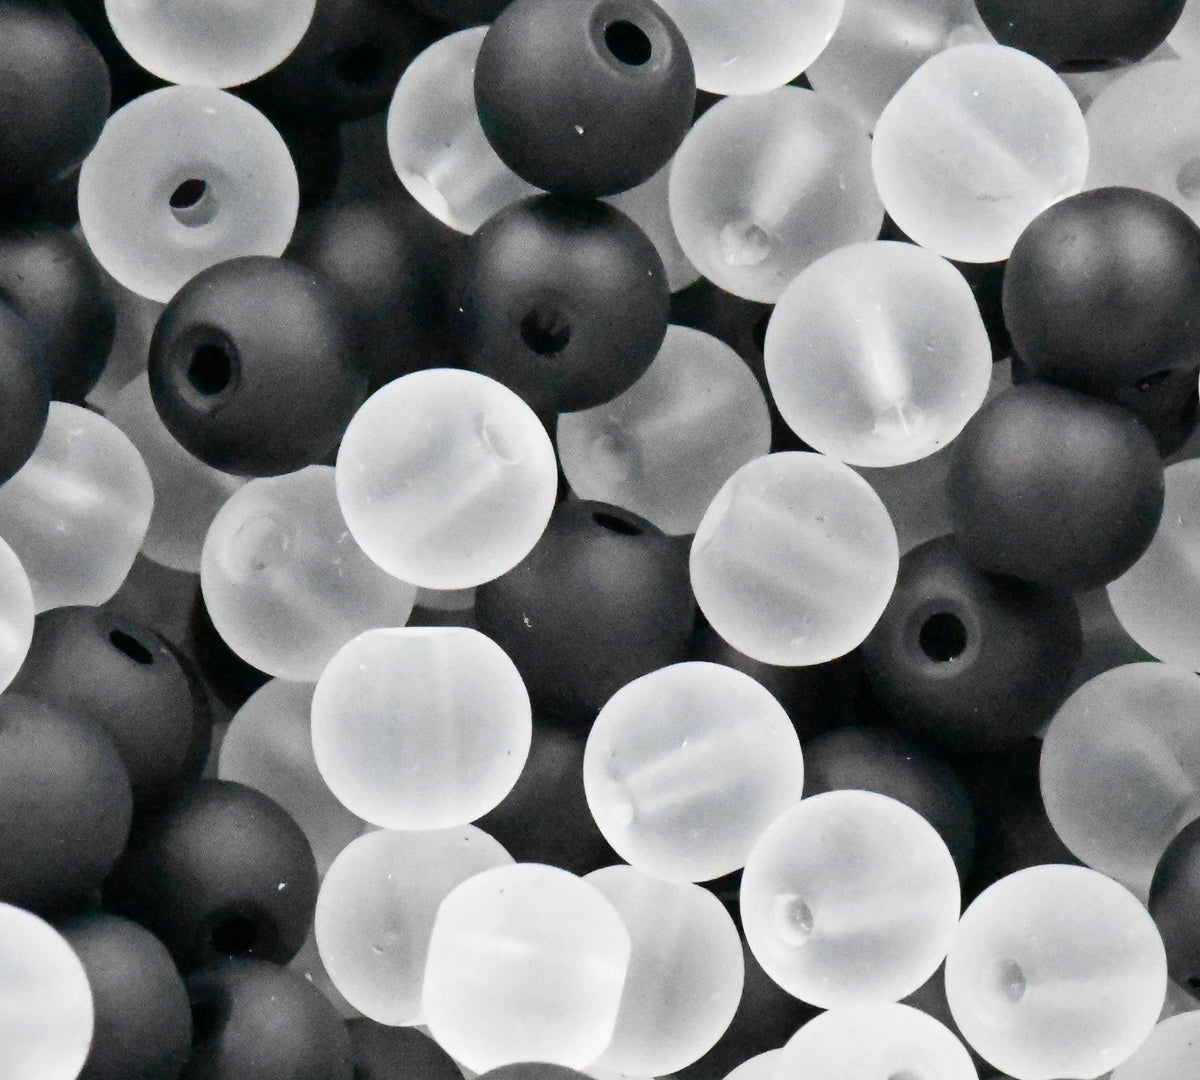 6mm 8mm Black and White Frosted Matte Glass Round Druk Cultured Sea Glass Beads - 200 beads